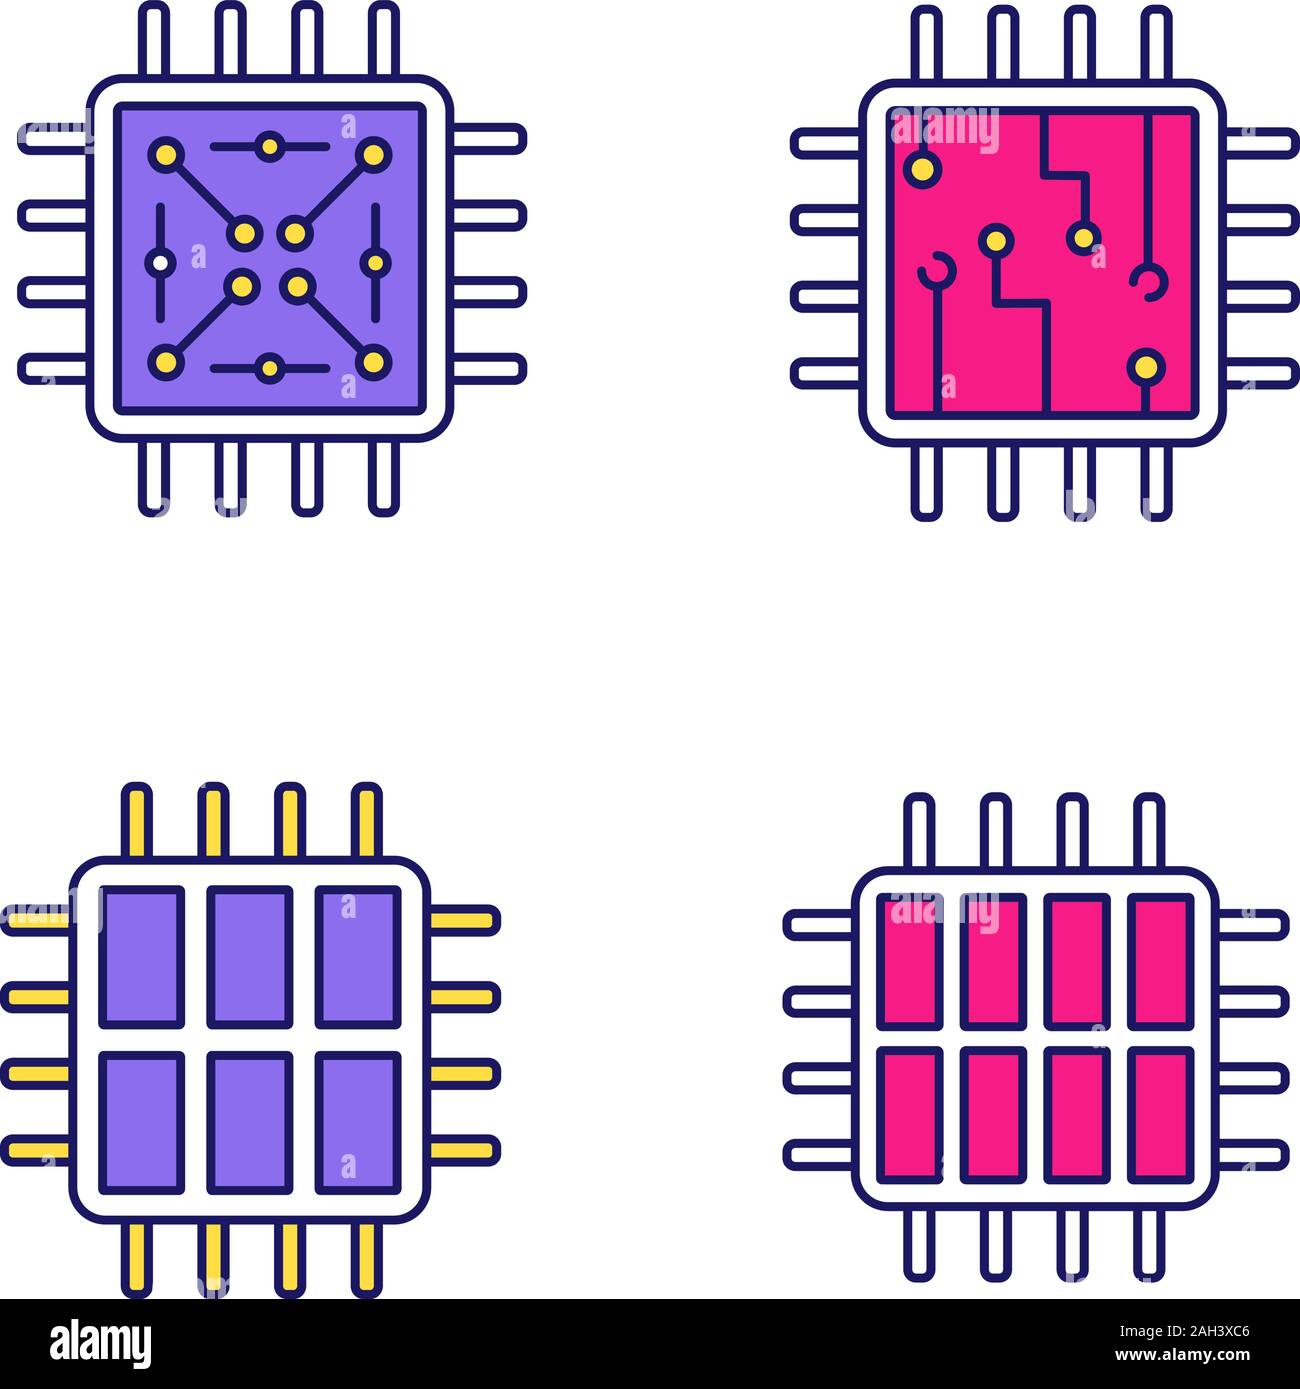 Processors color icon. Chip, microprocessor, integrated unit, six and octa core processors. Isolated vector illustration Stock Vector